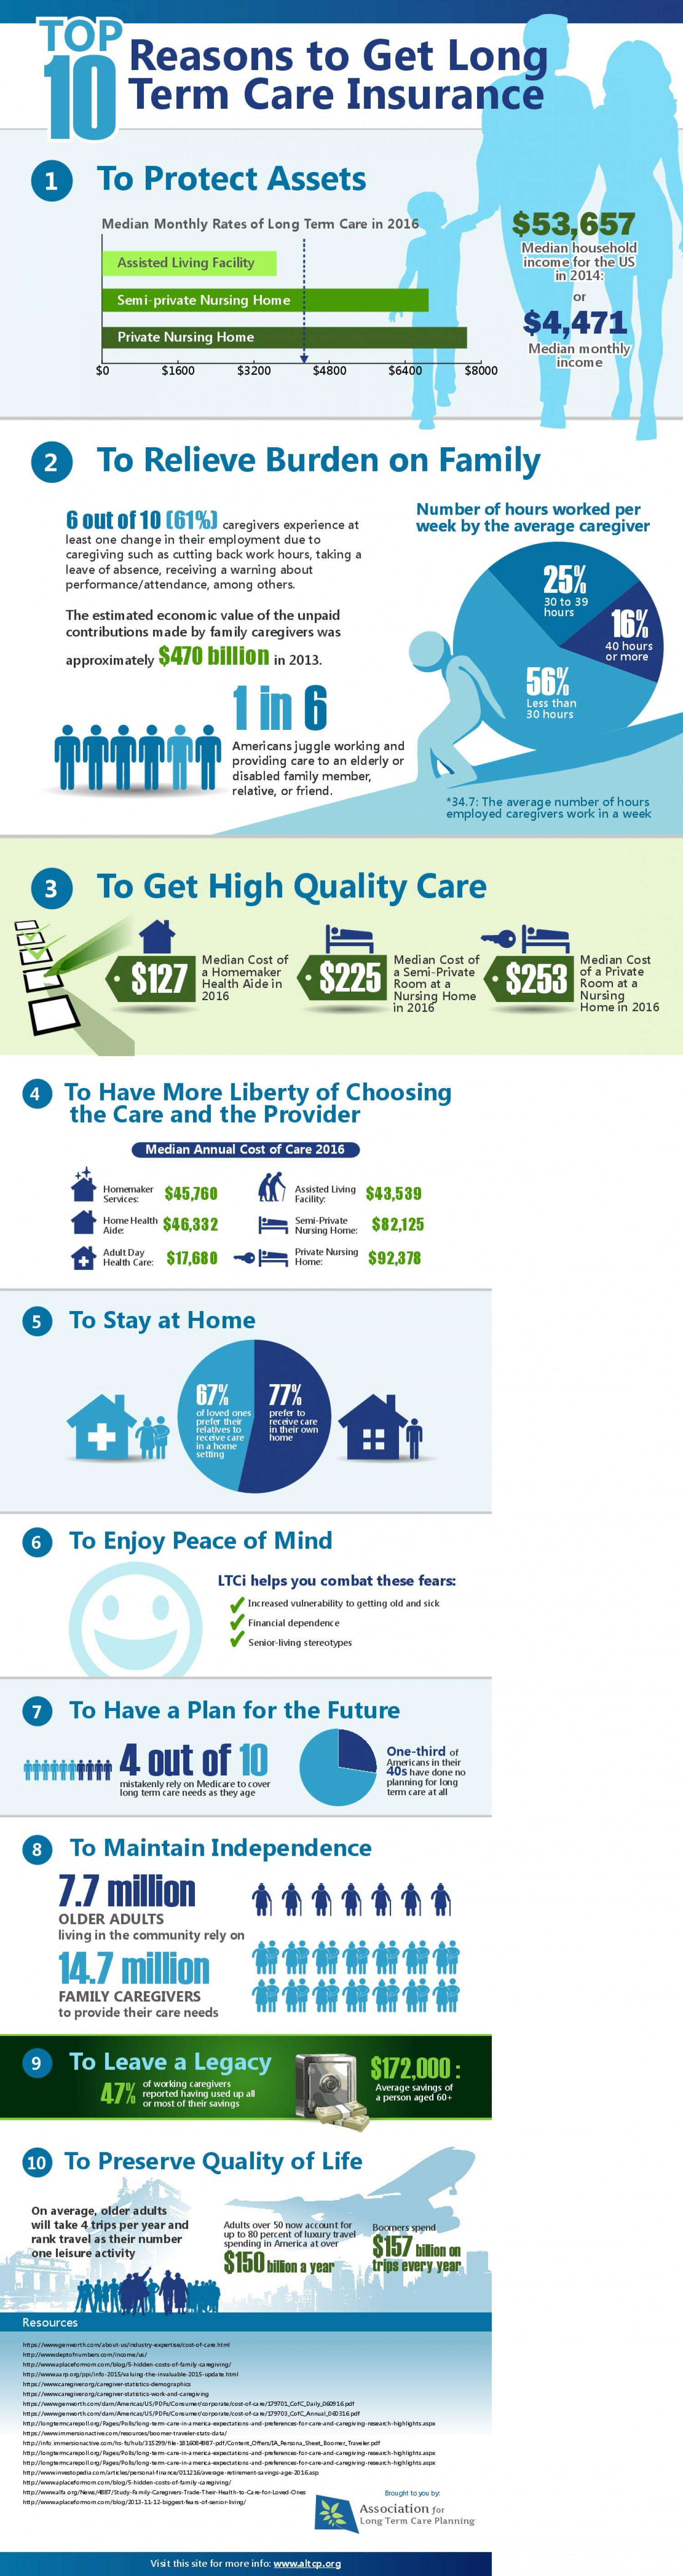 Top 10 Reasons to get Long Term Care Insurance Infographic